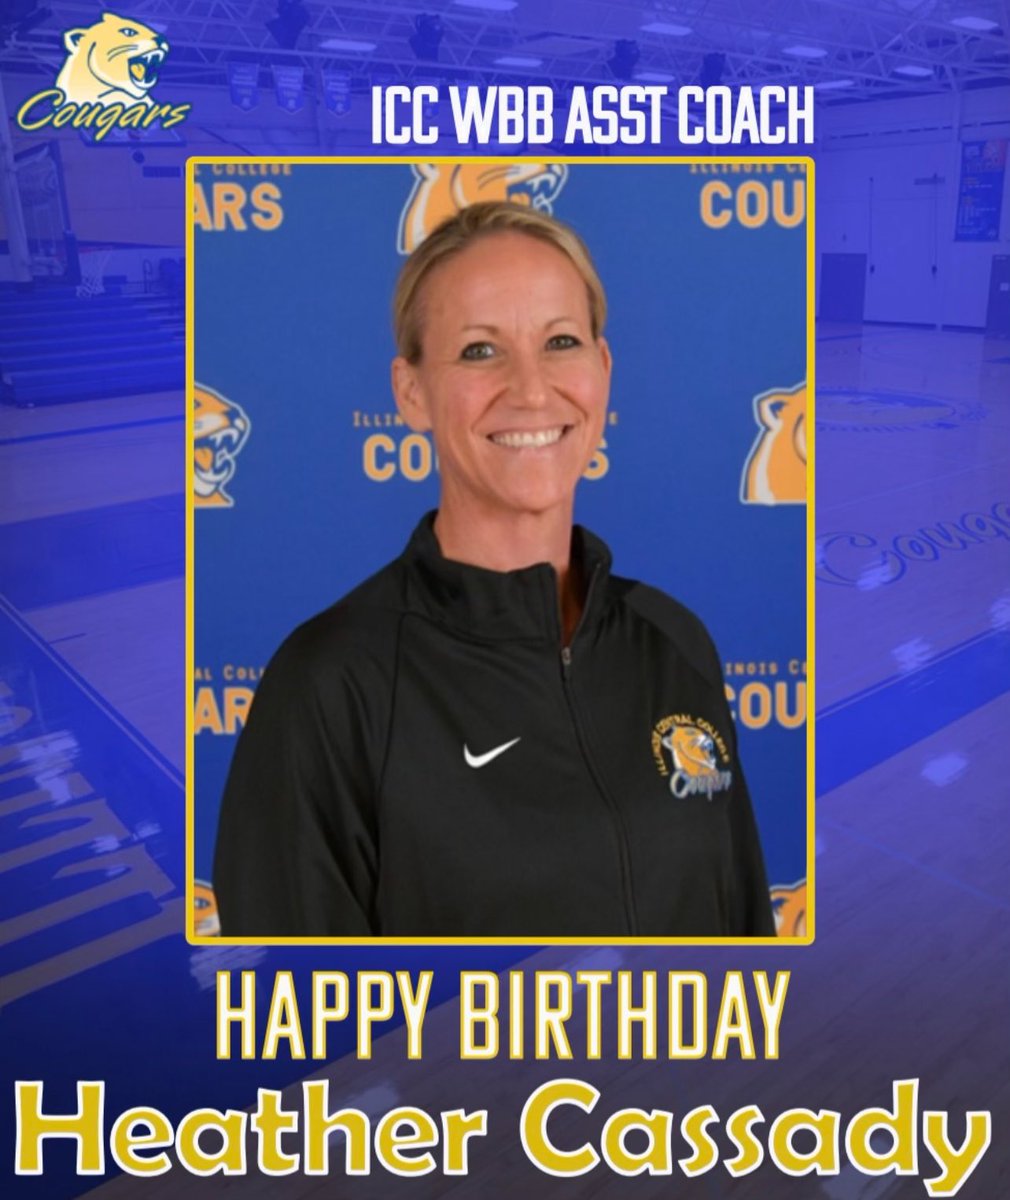 🏀 Happy birthday to @ICC_CougarsWBB asst coach @HeatherCassady4! We appreciate all of your time & efforts in making our players & program great!